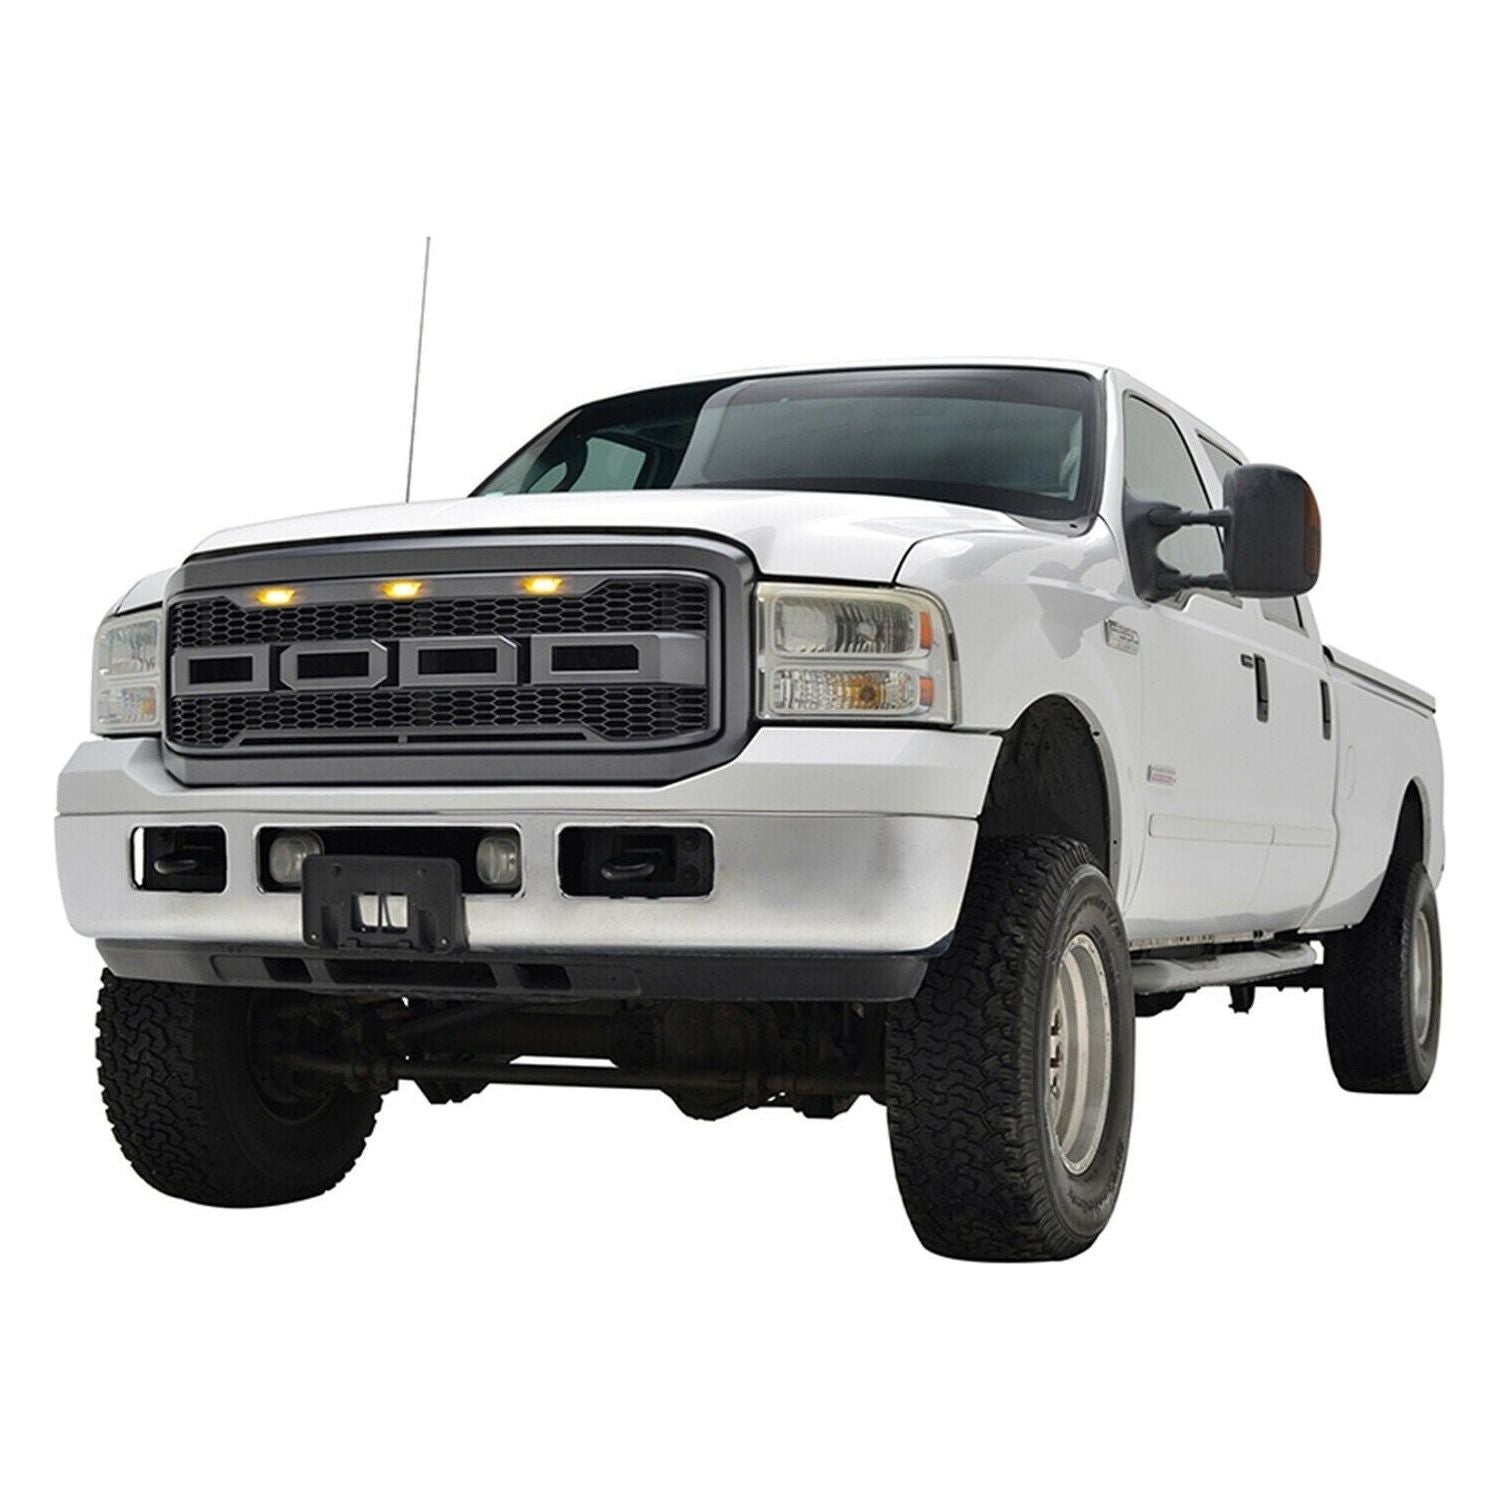 2005-2007 Ford F250 Super Duty | Raptor Style Grille - Truck Accessories Guy